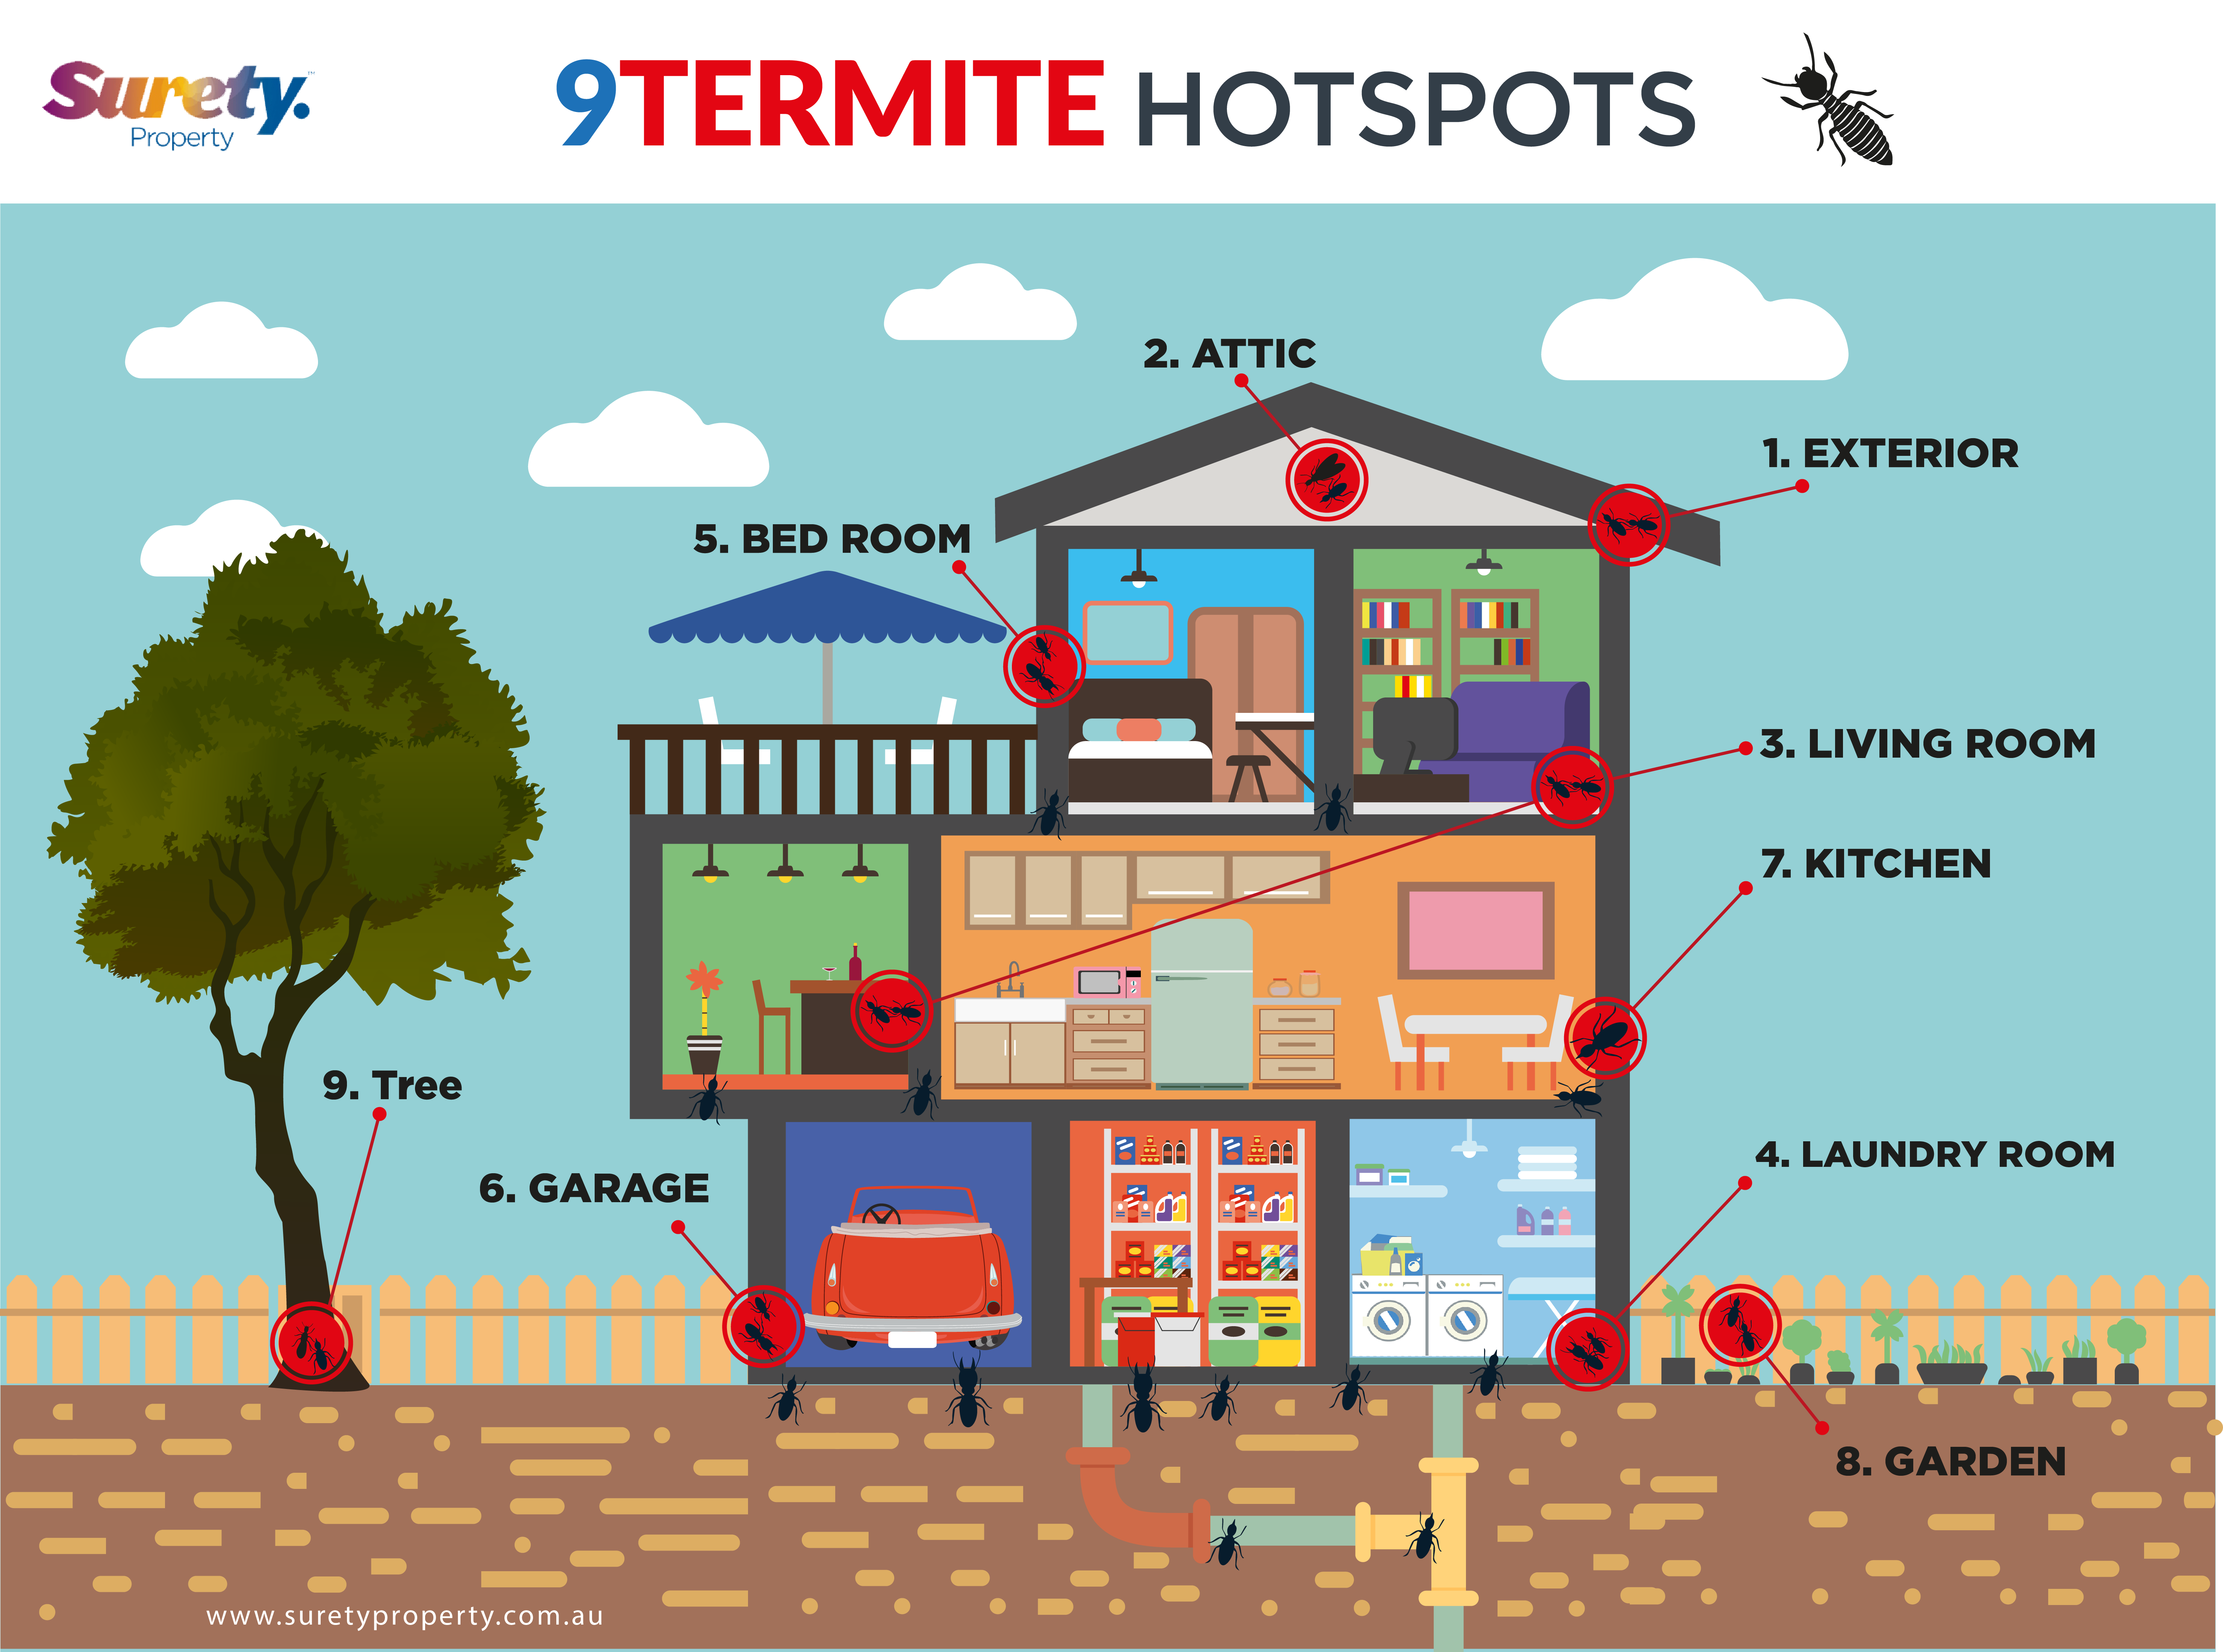 Destructive termites will eat your house where can I find them in my house.